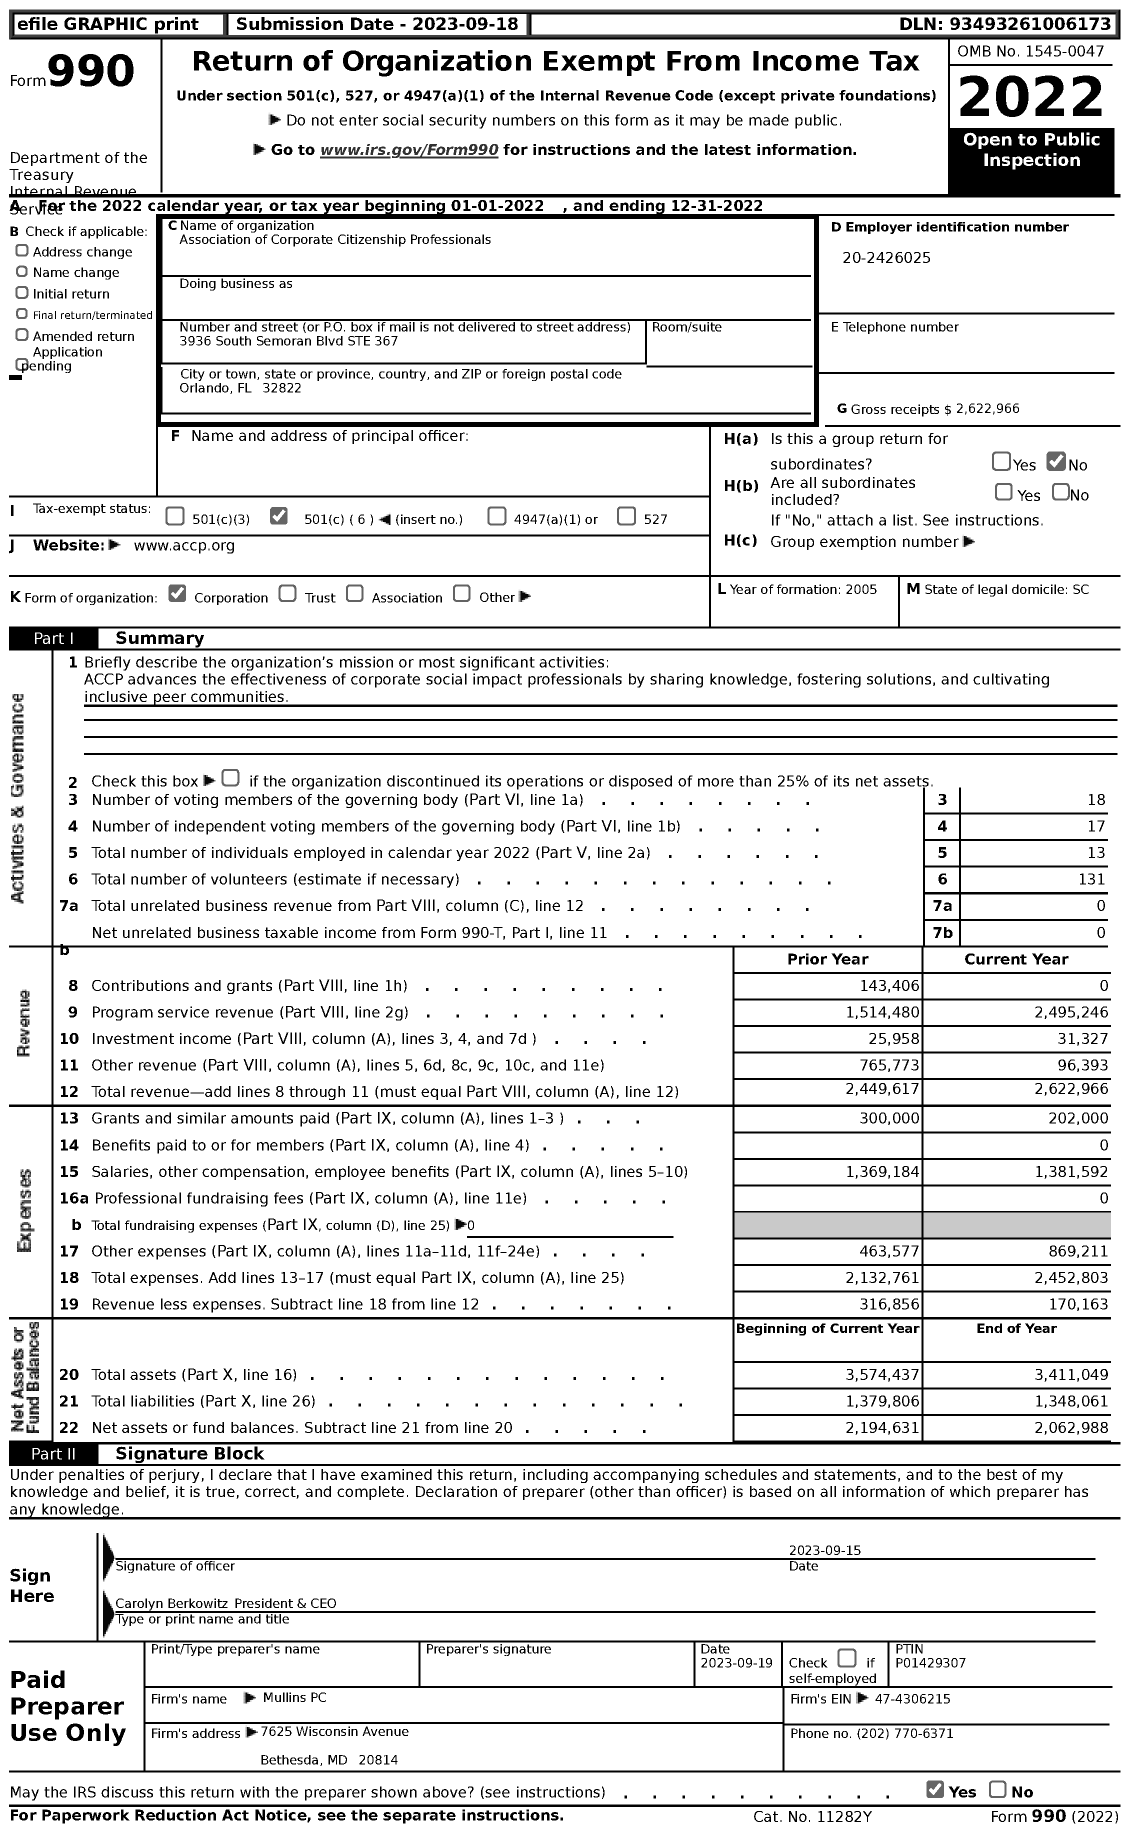 Image of first page of 2022 Form 990 for Association of Corporate Citizenship Professionals (ACCP)